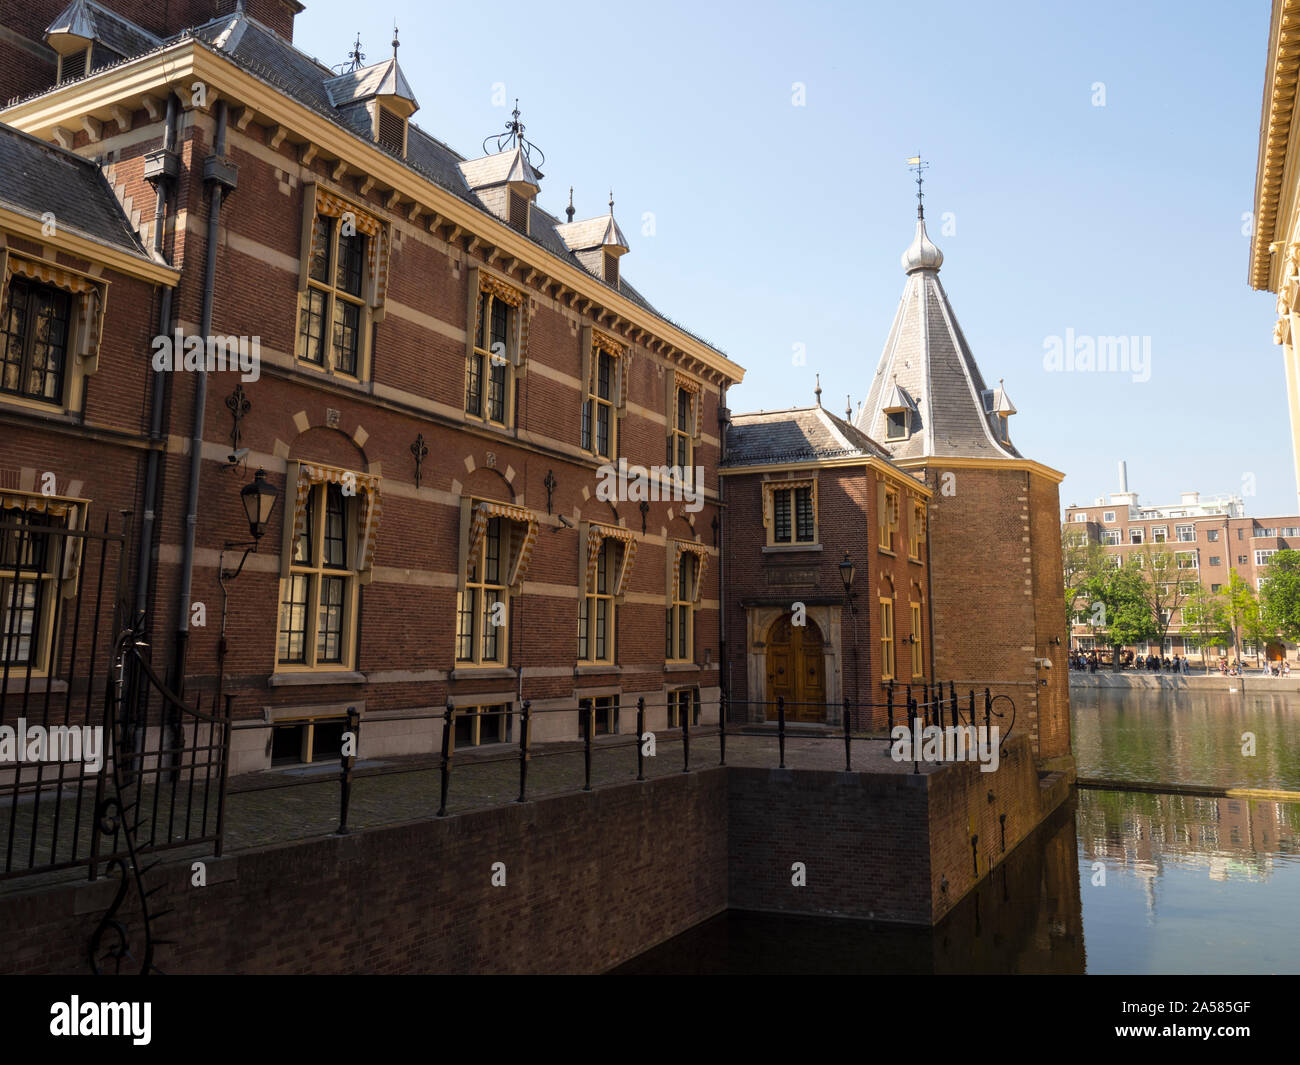 Tower, canal and building, The Hague, South Holland, Netherlands Stock Photo